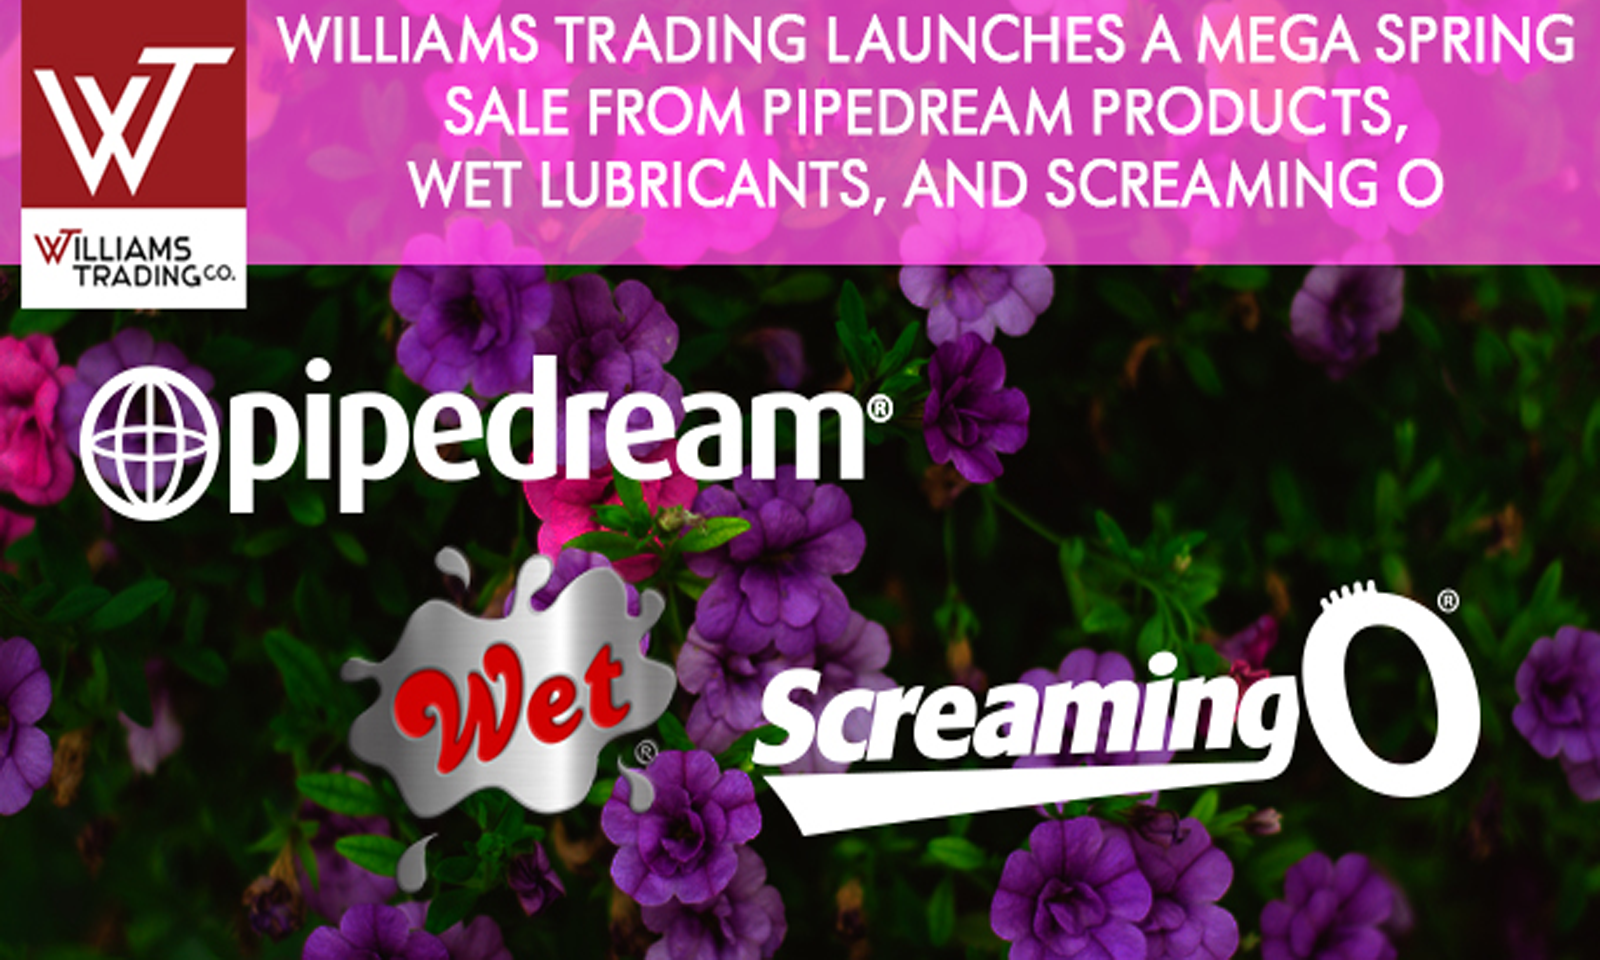 Williams Trading Greets Spring with a Mega Sale